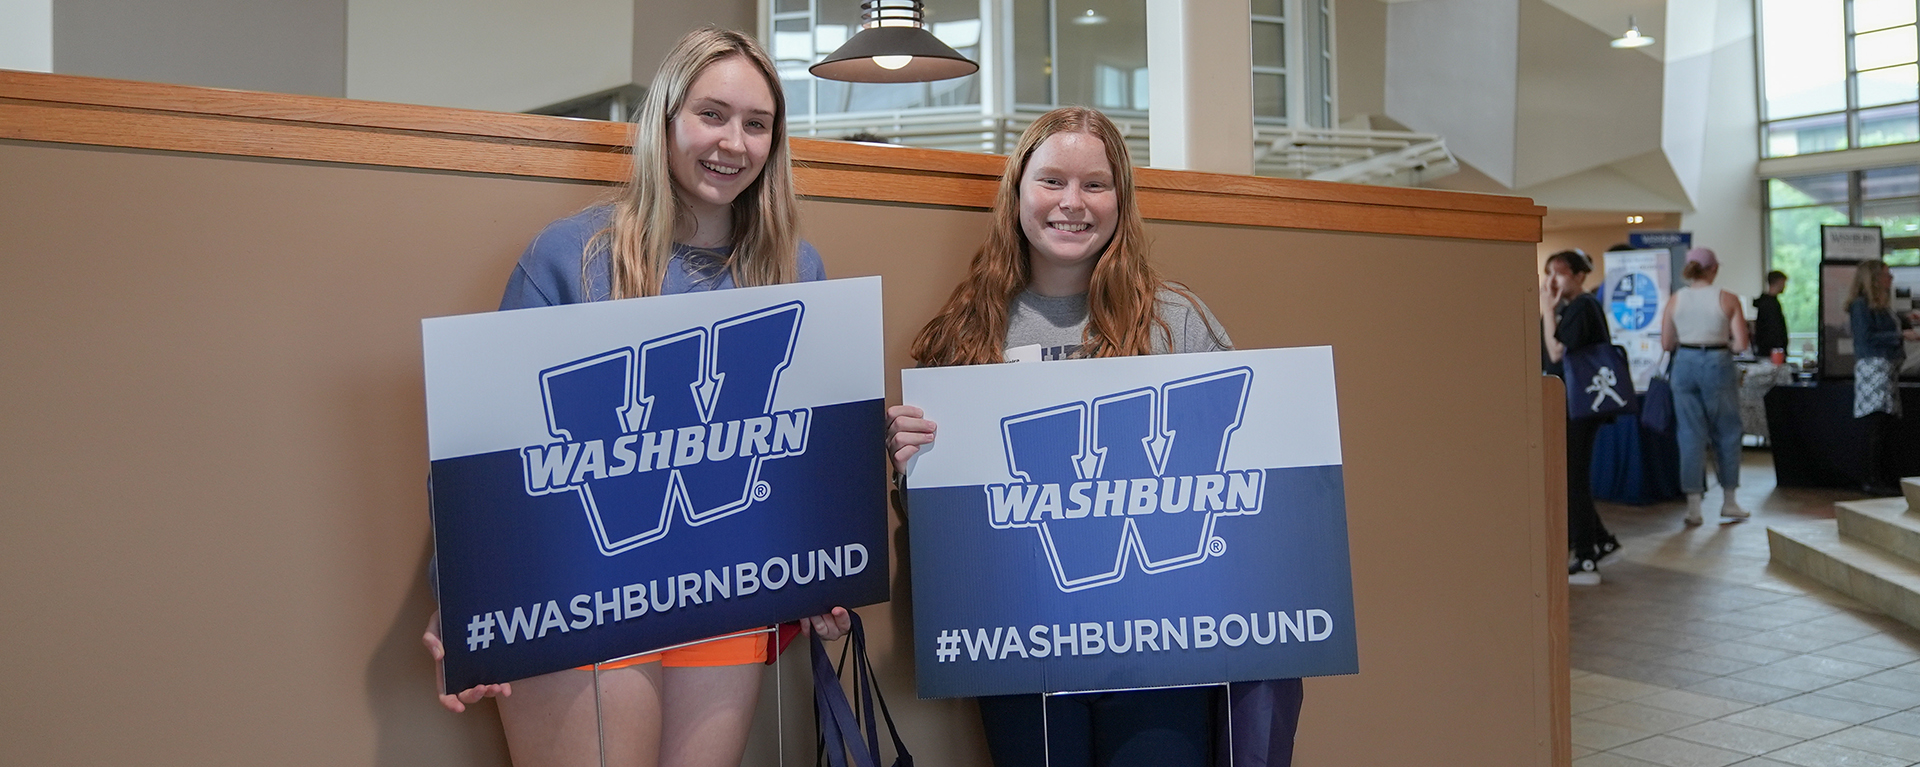 Two new Washburn students smiling